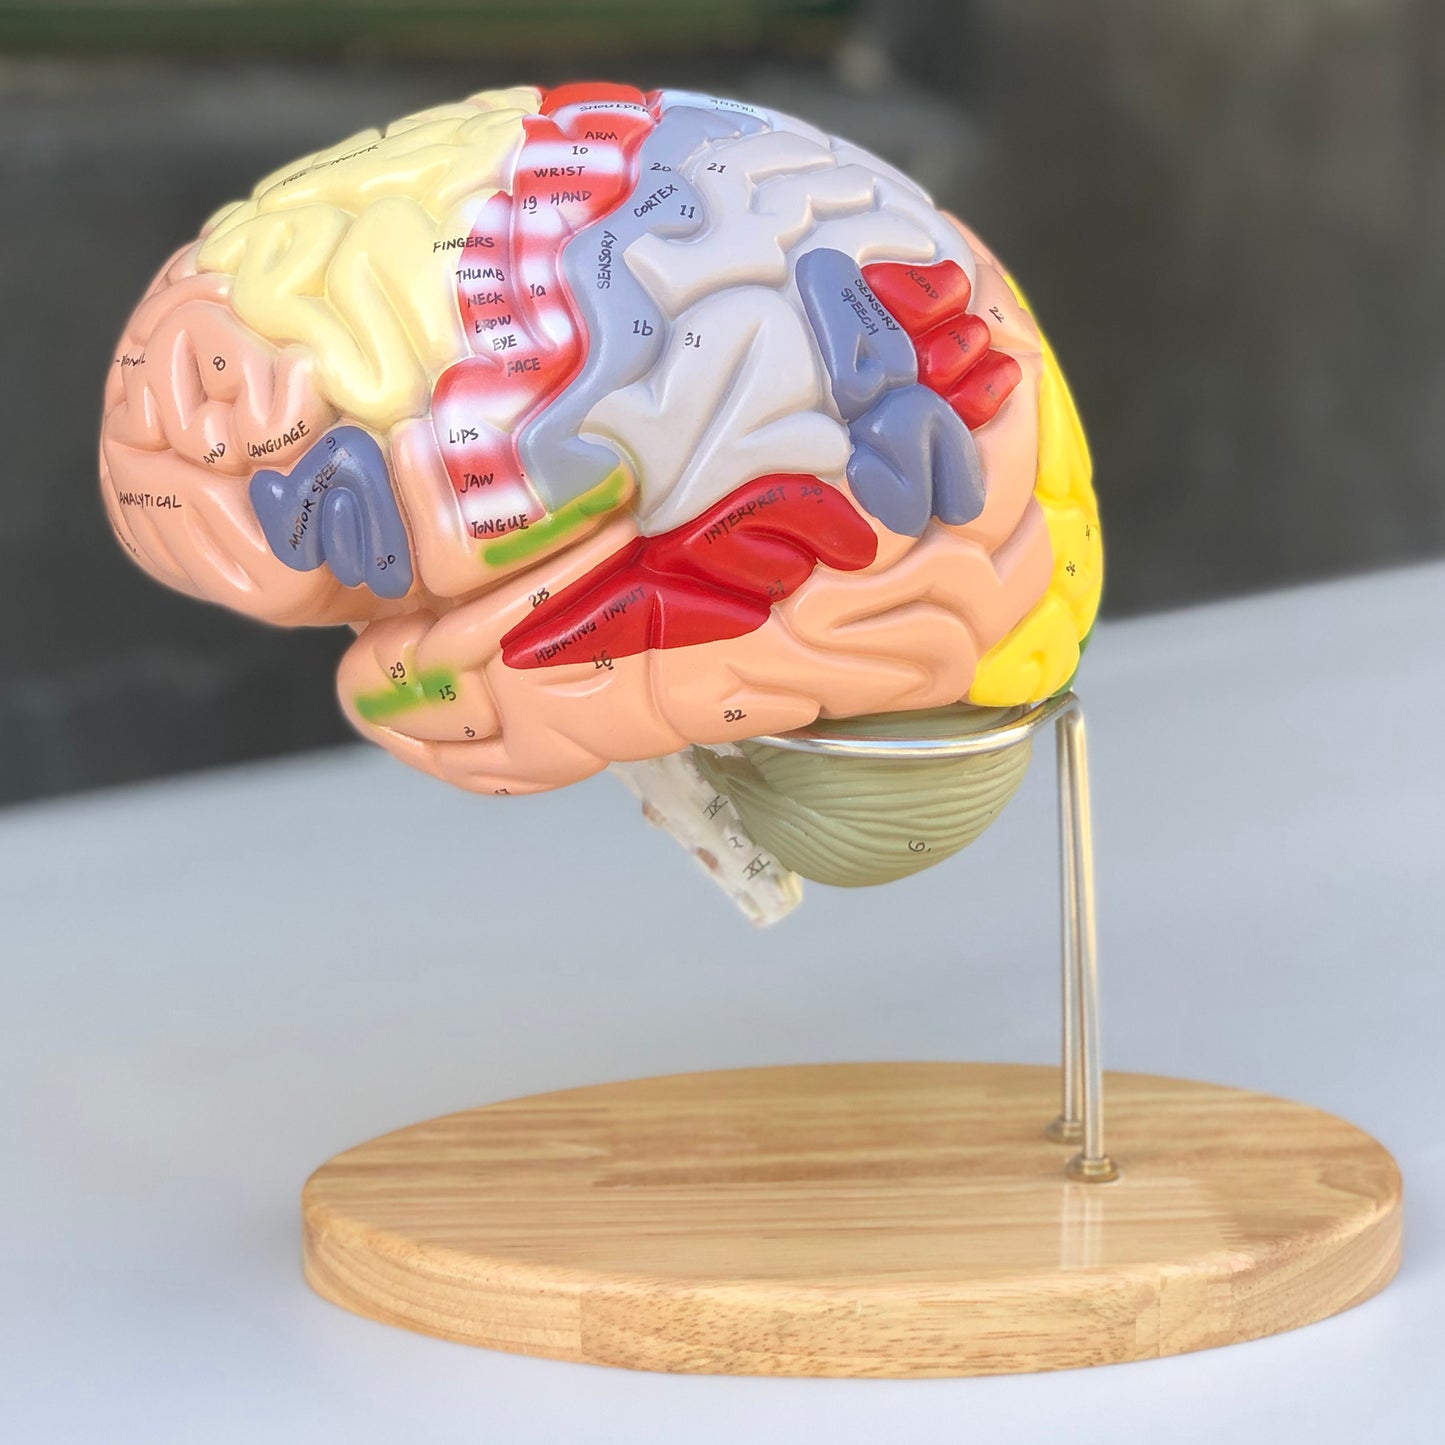 Enlarged brain model with many areas in educational colors. Can be separated into 4 parts